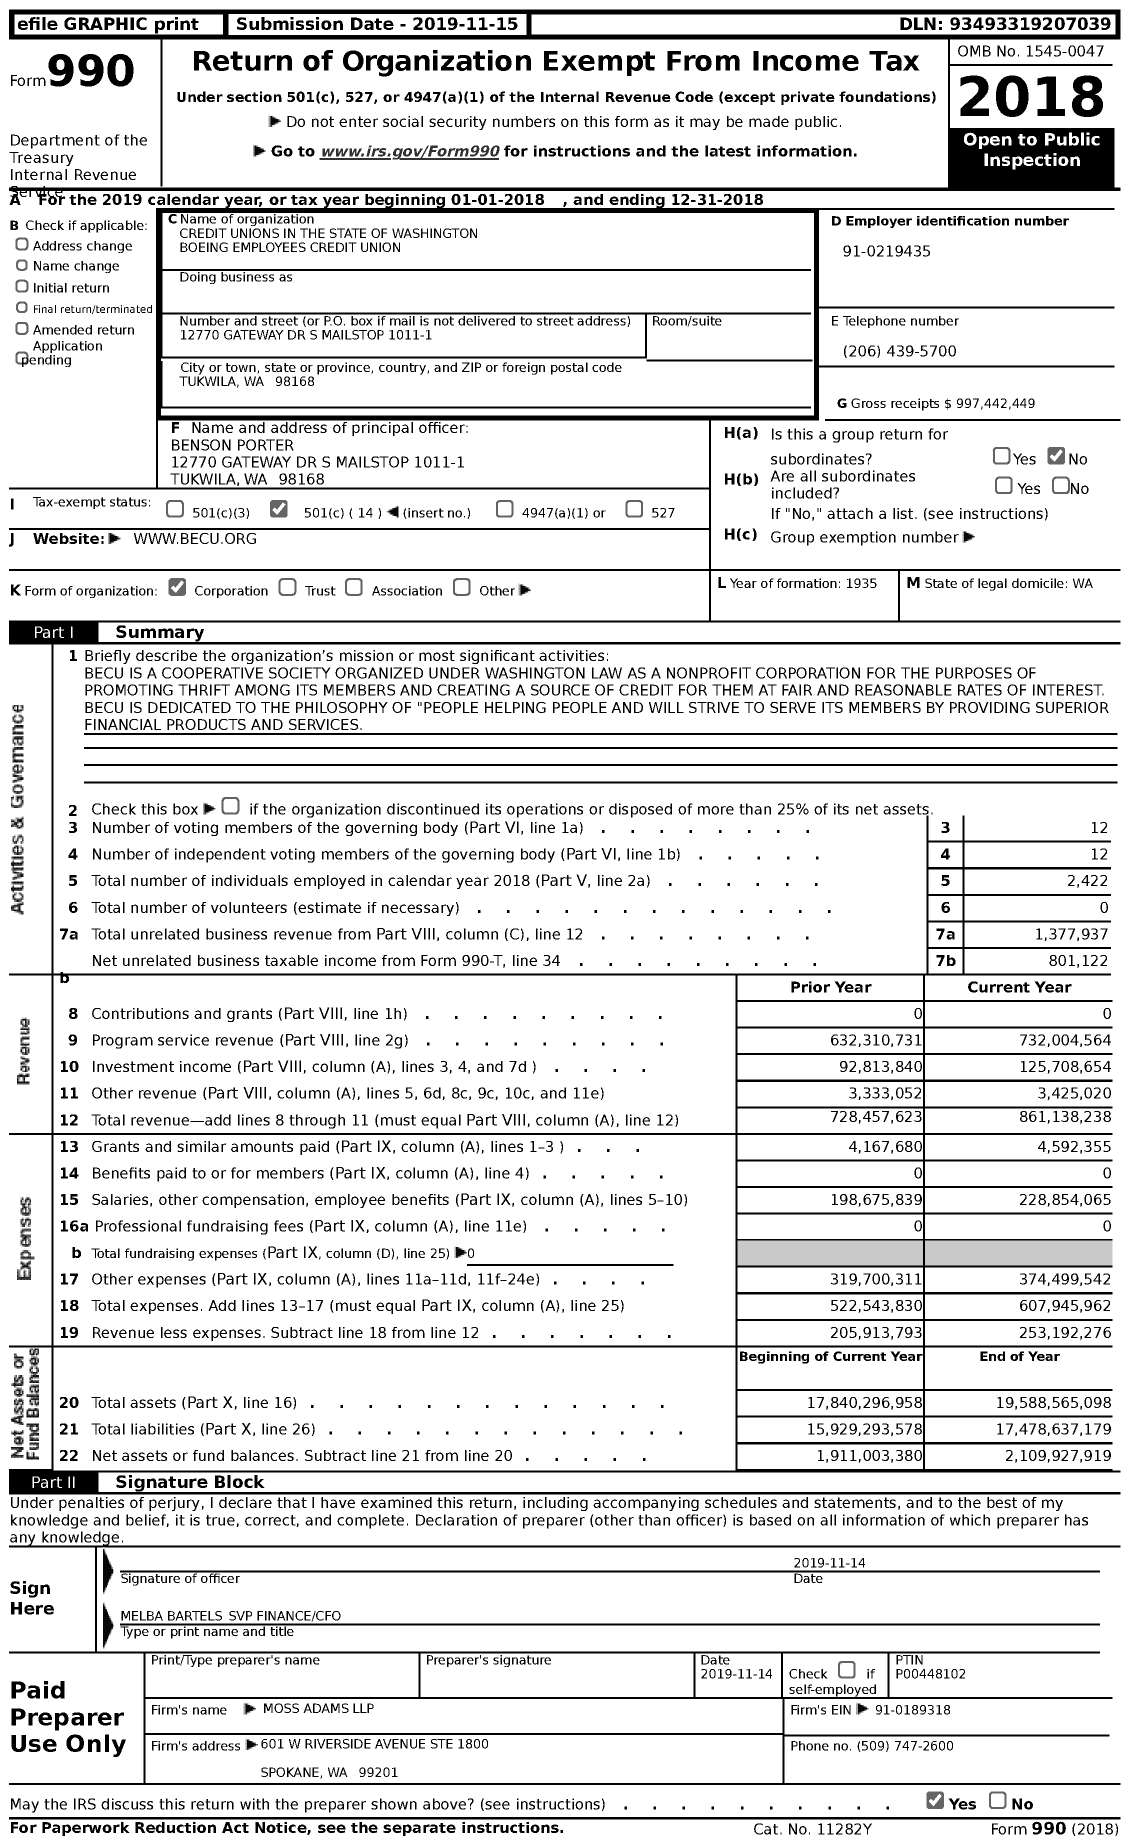 Image of first page of 2018 Form 990 for Credit Unions in the State of Washington Boeing Employees Credit Union (BECU)